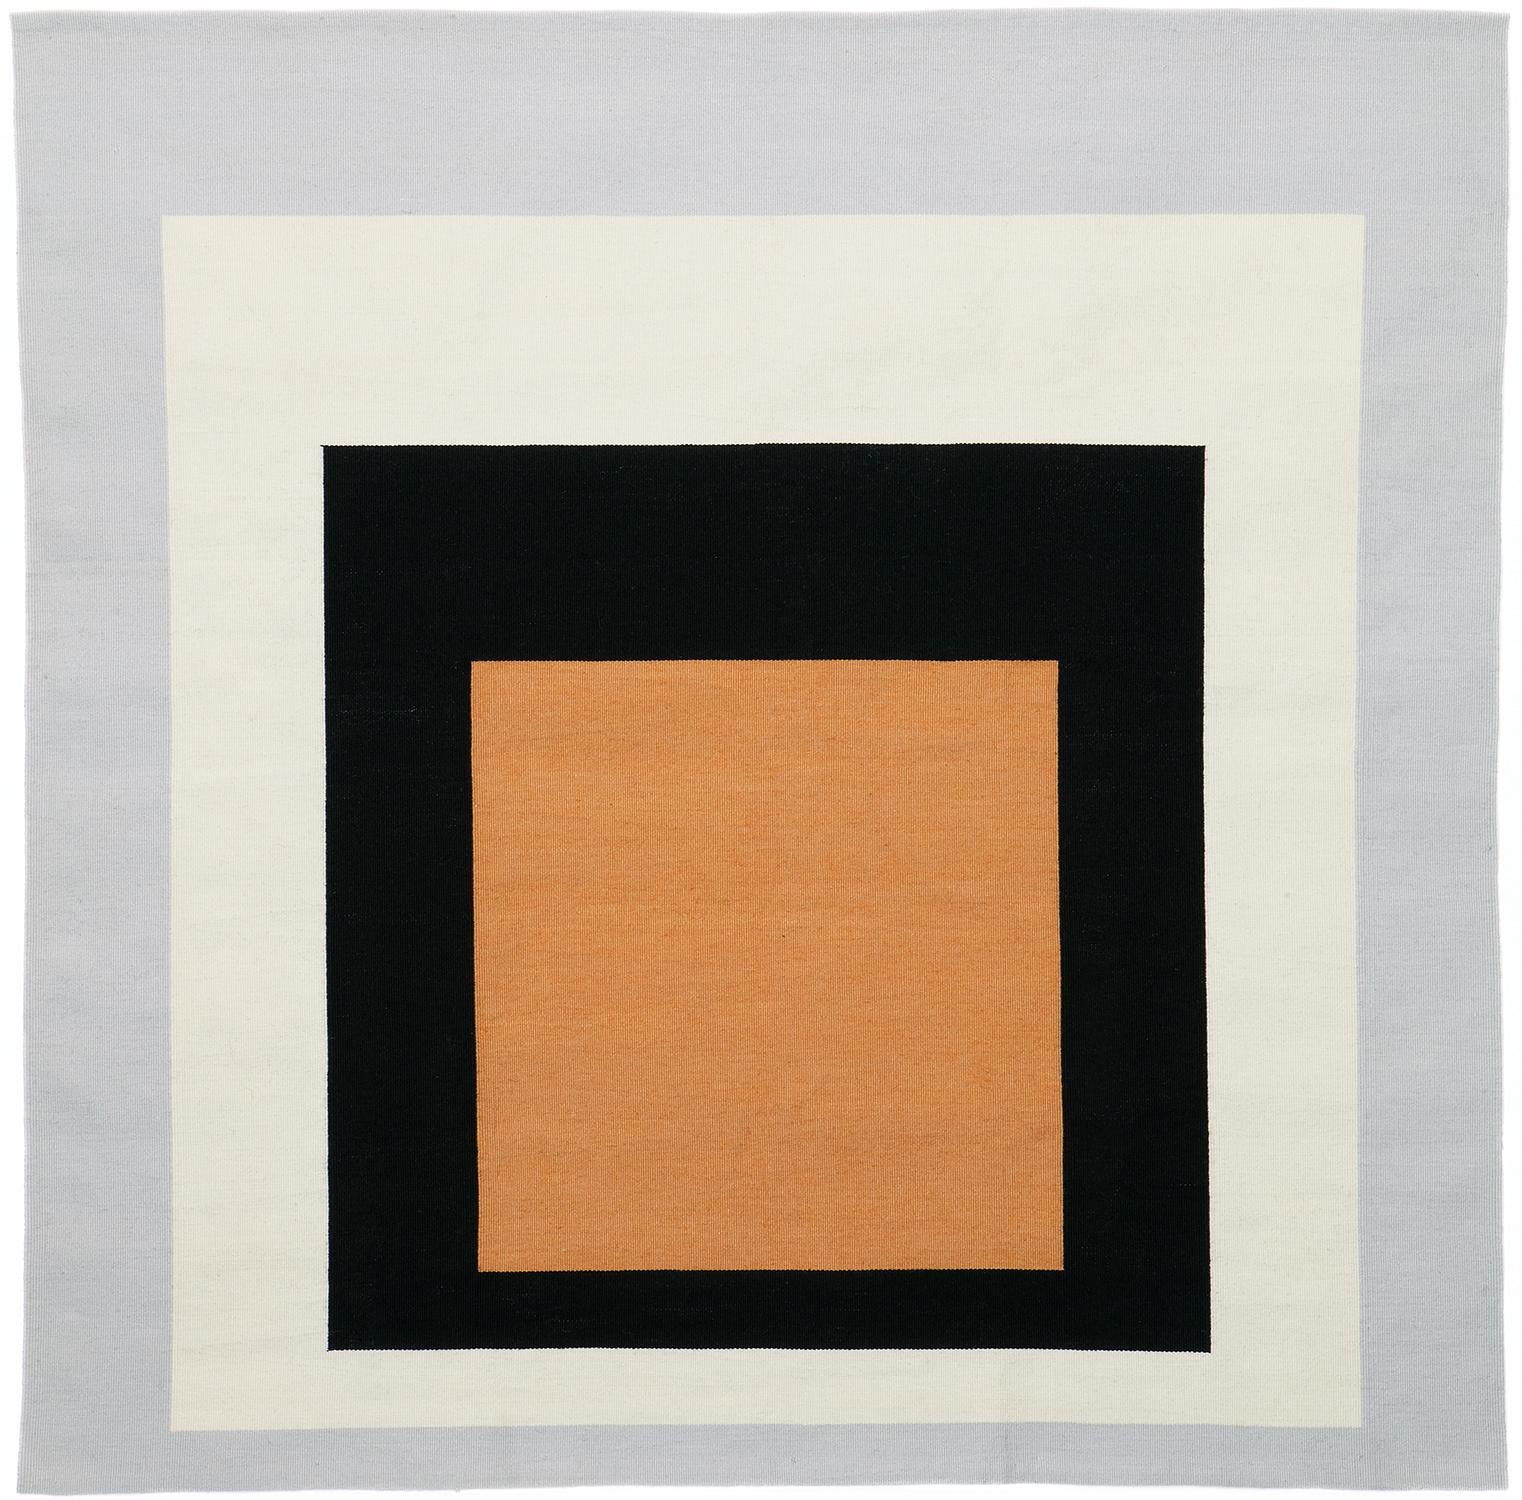 "Homage to the Square" New Gate Tapestry by Josef Albers